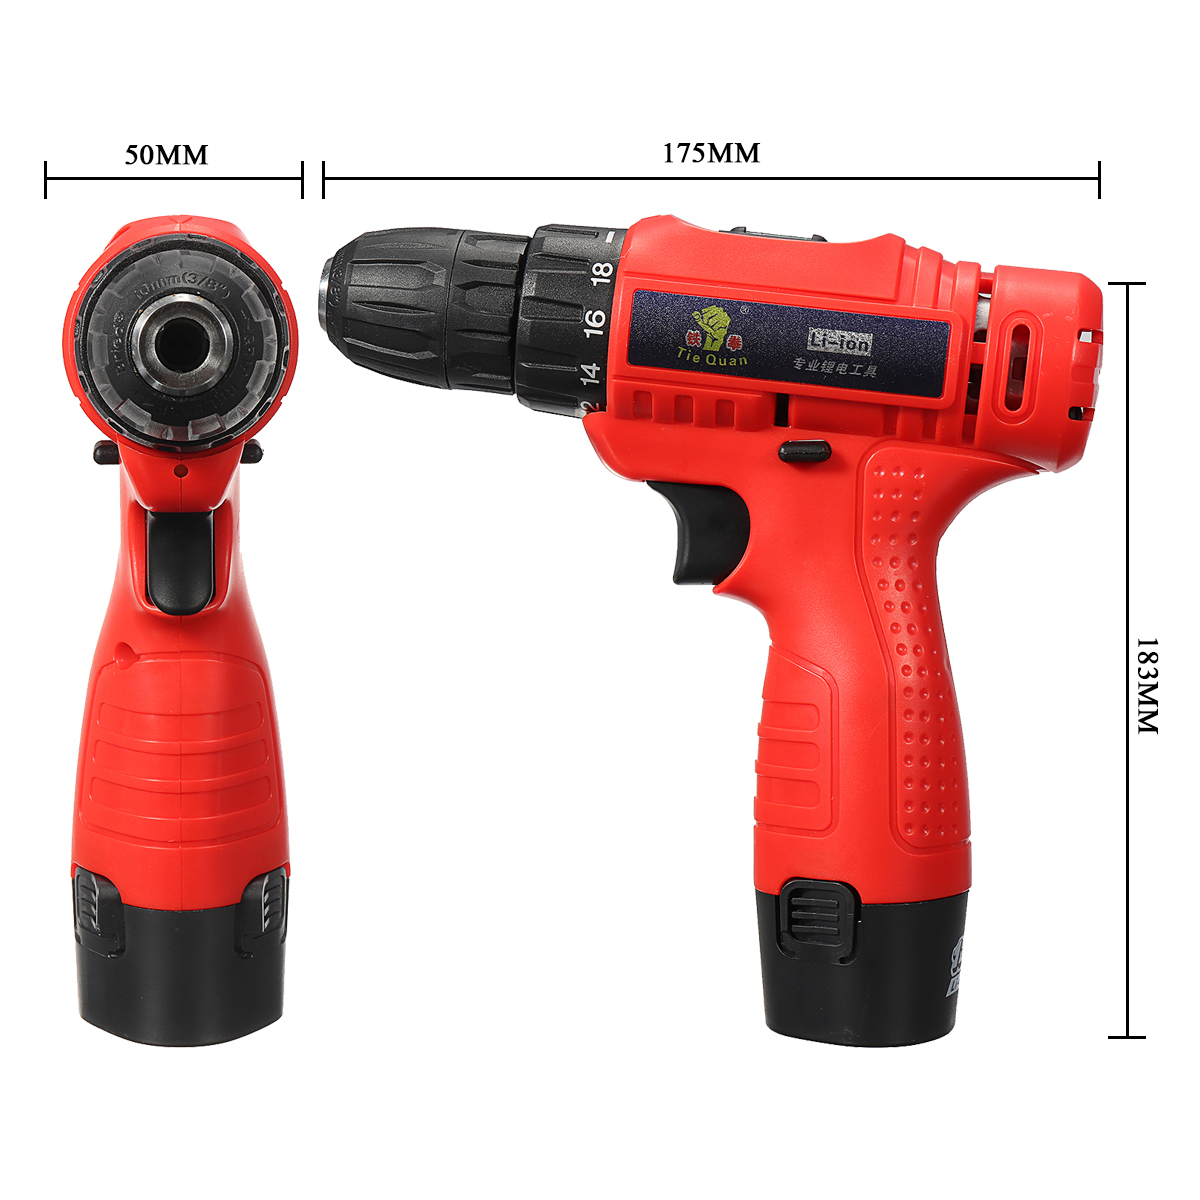 110V-240V-Cordless-Electric-Screwdriver-1-Battery-1-Charger-Drilling-Punching-Power-Tools-1287724-8